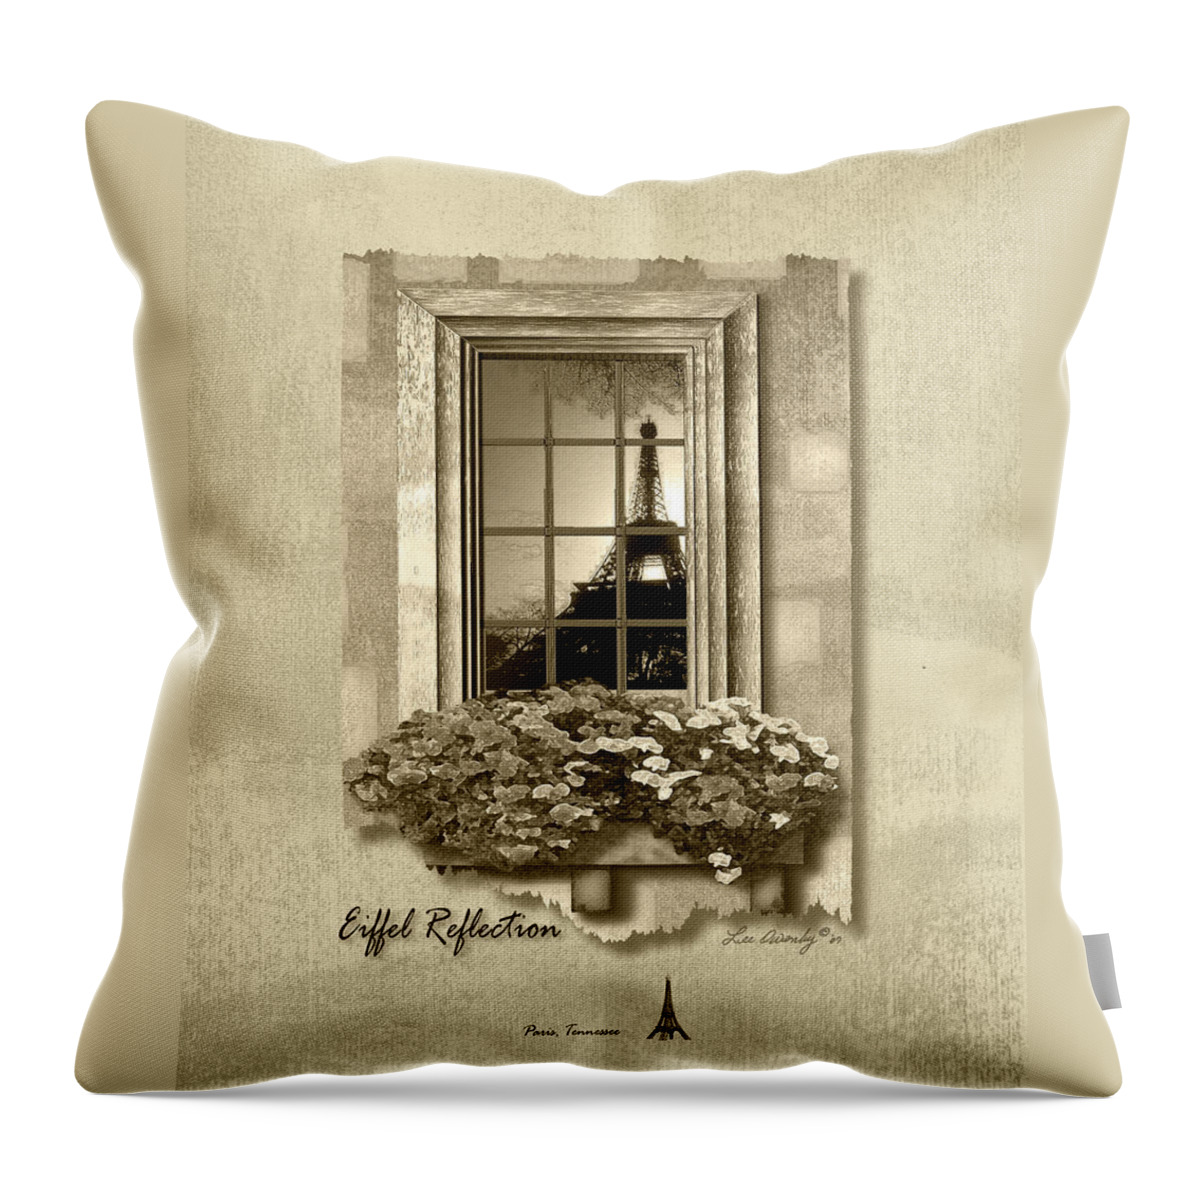 Eiffel Tower Throw Pillow featuring the digital art Eiffel Reflection in Sepia by Lee Owenby